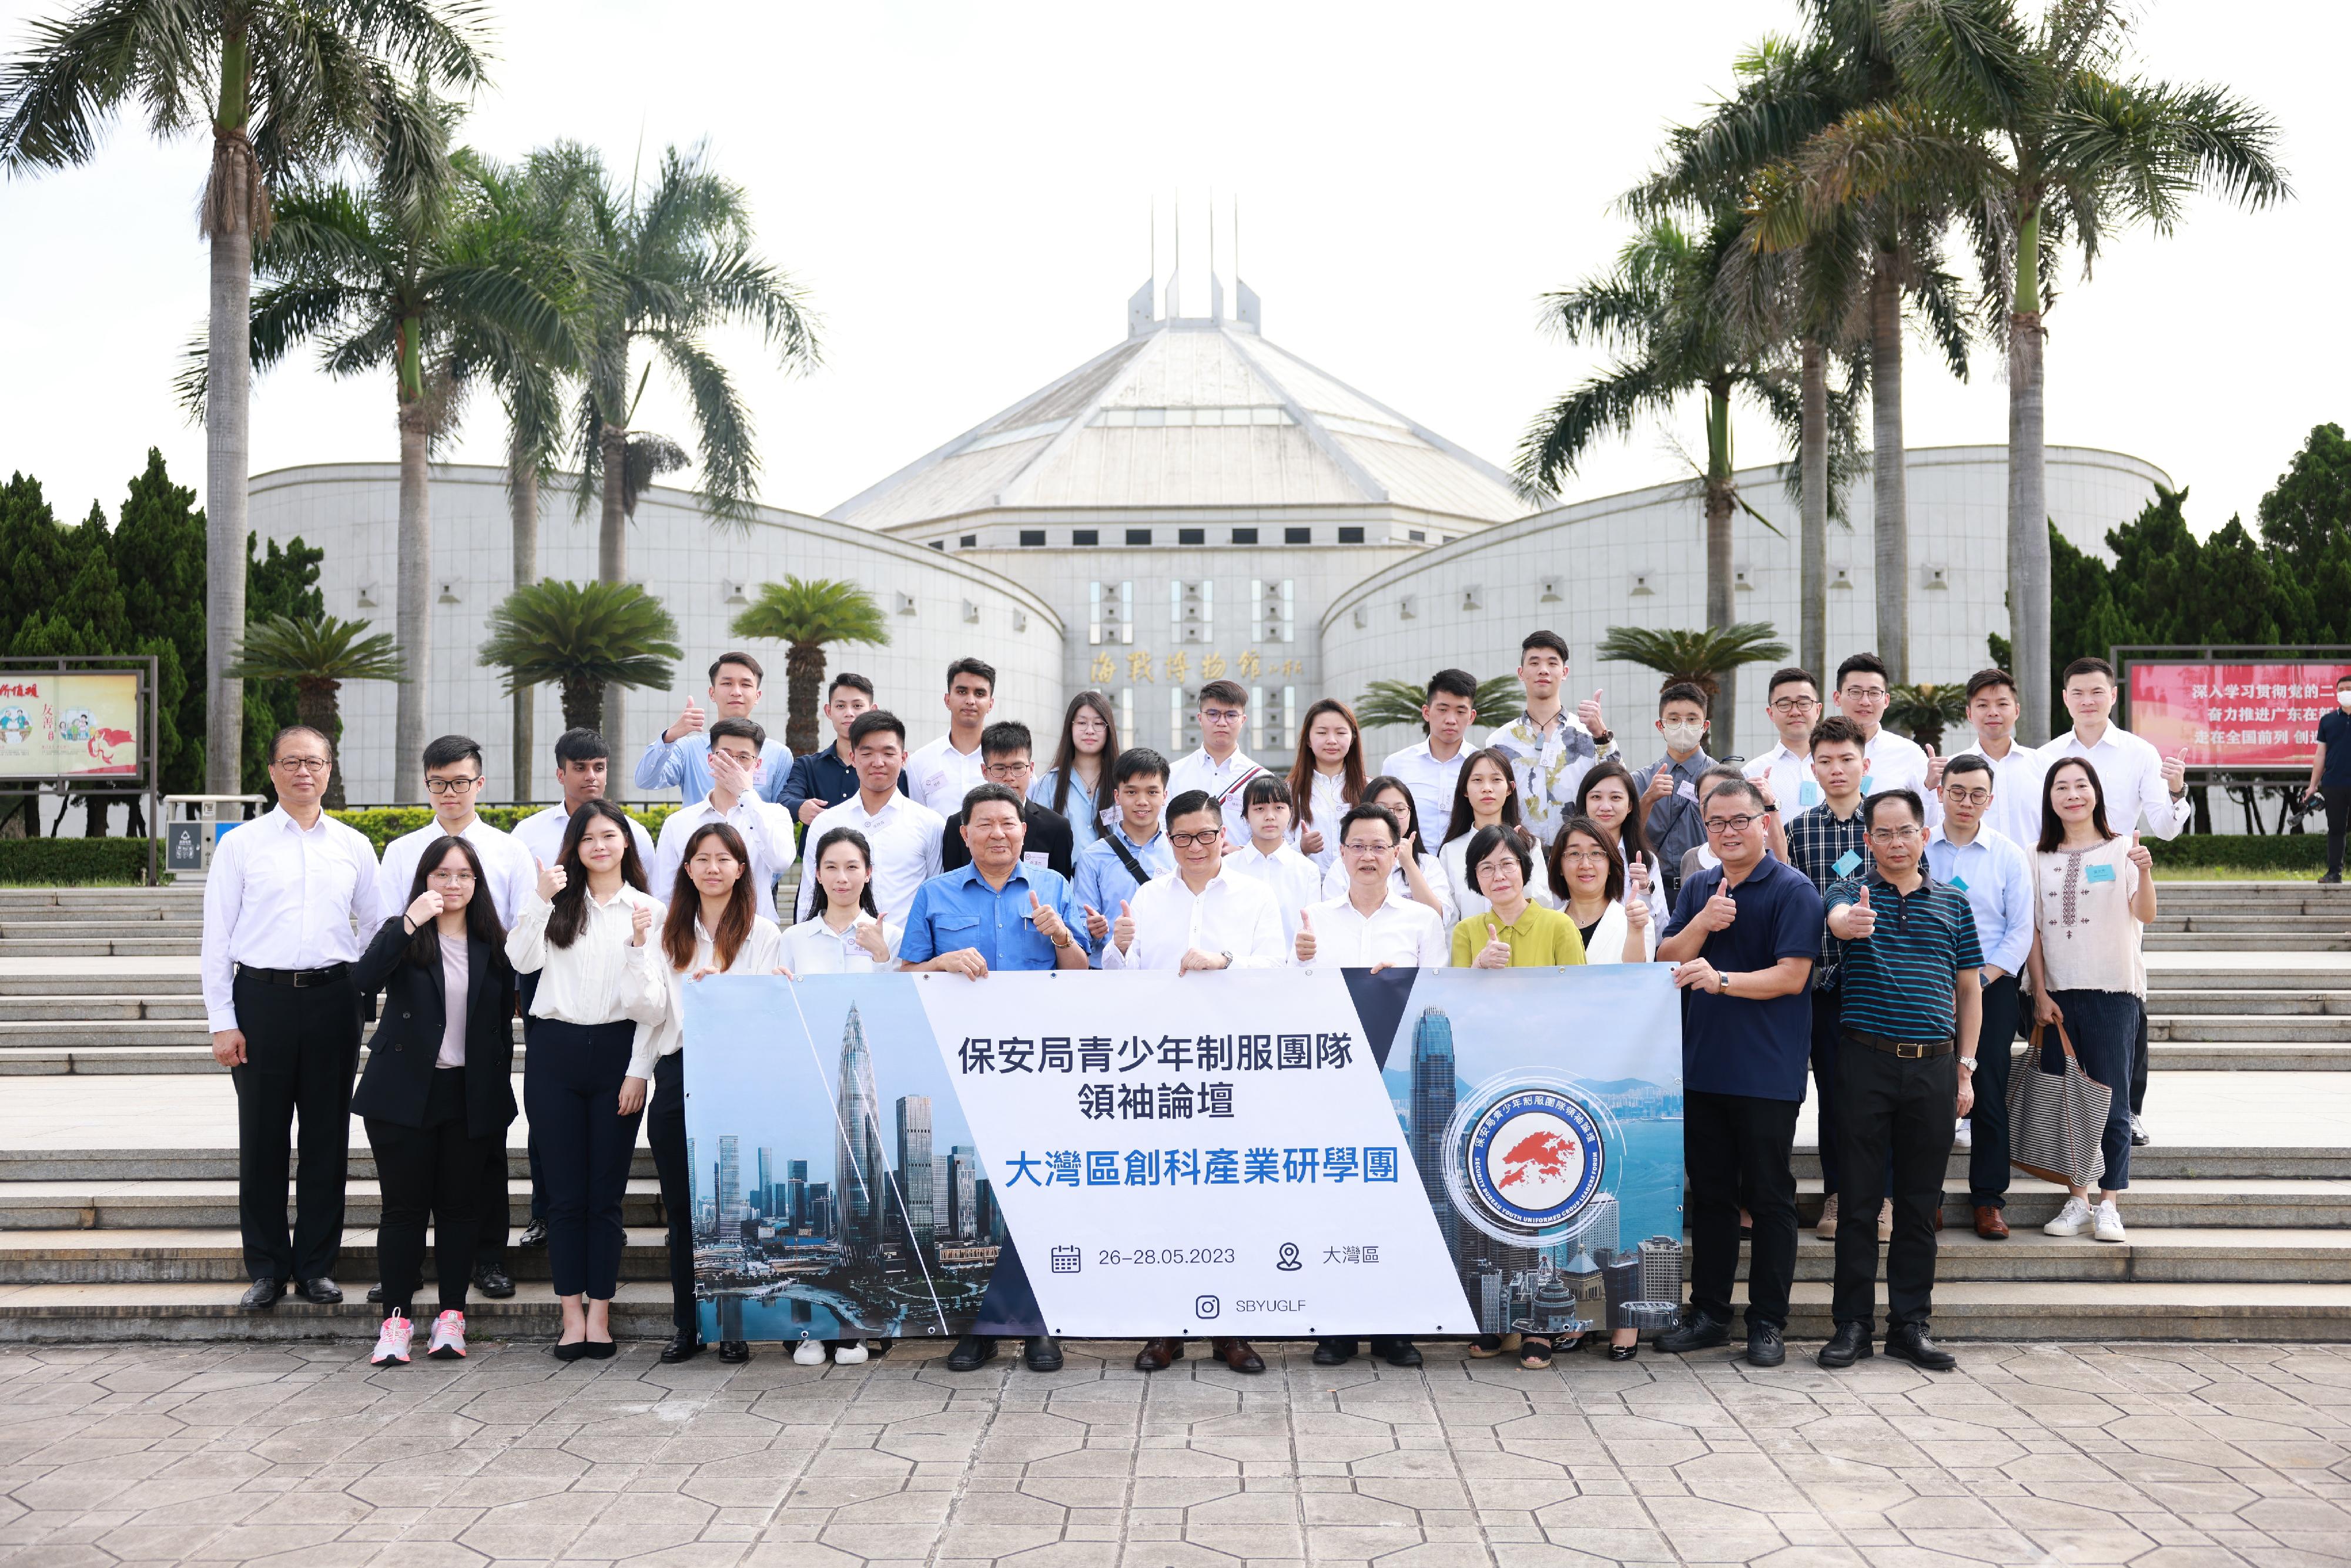 The Secretary for Security, Mr Tang Ping-keung, today (May 26) led members of the Security Bureau Youth Uniformed Group Leaders Forum to commence a three-day study tour on innovation and technology in the Guangdong-Hong Kong-Macao Greater Bay Area. Photo shows Mr Tang (sixth left, first row) and members of the Leaders Forum posing for a group photo.